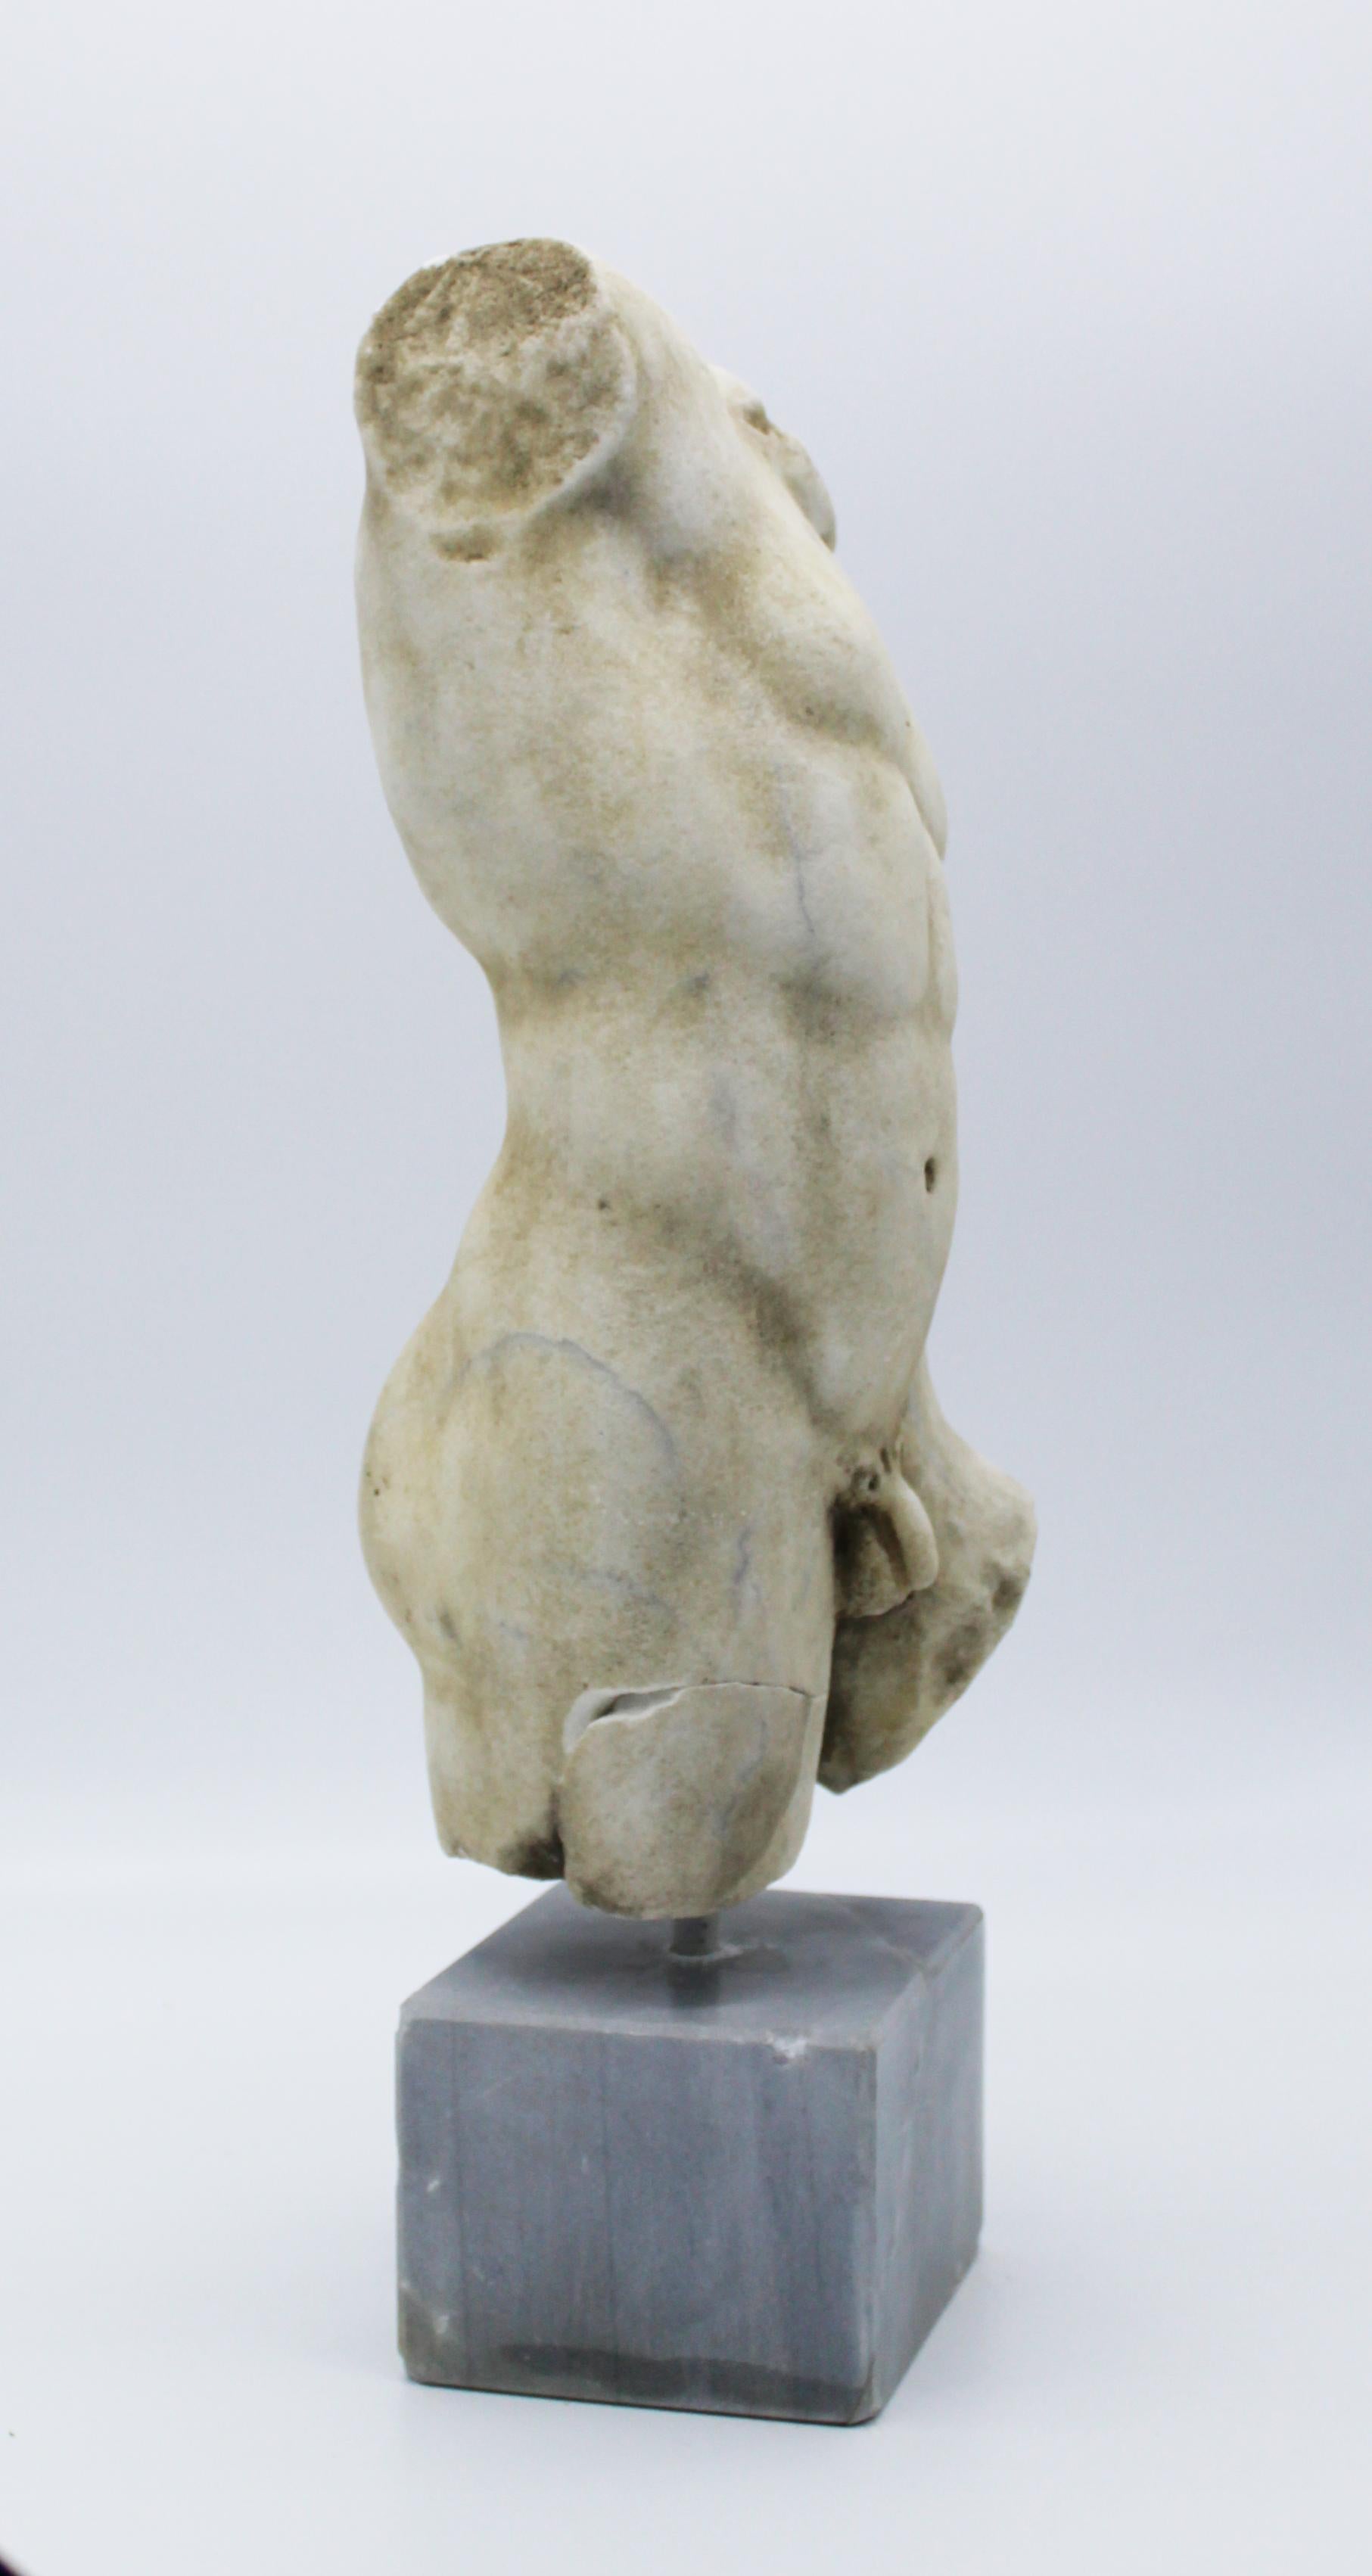 Hand-Carved 20th Century White Marble Italian Sculpture Torso of Apollo by Giancarlo Pace